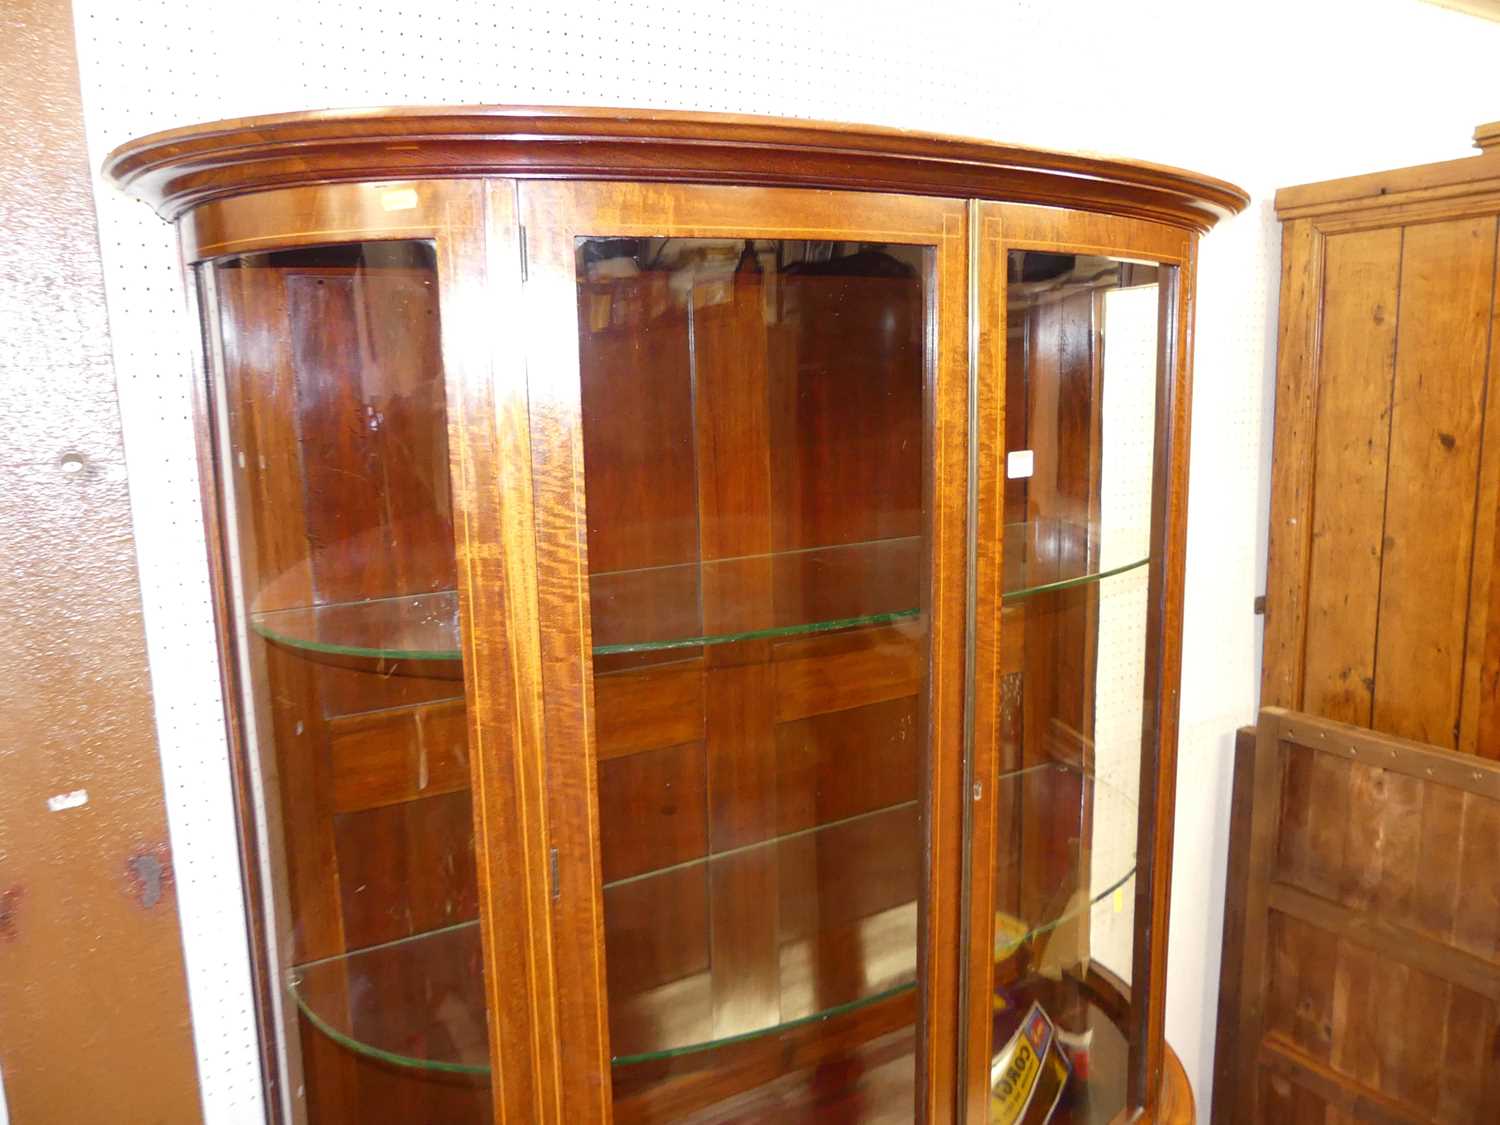 An Edwardian mahogany and floral satin wood inlaid demi-lune double door glazed china display - Image 2 of 3